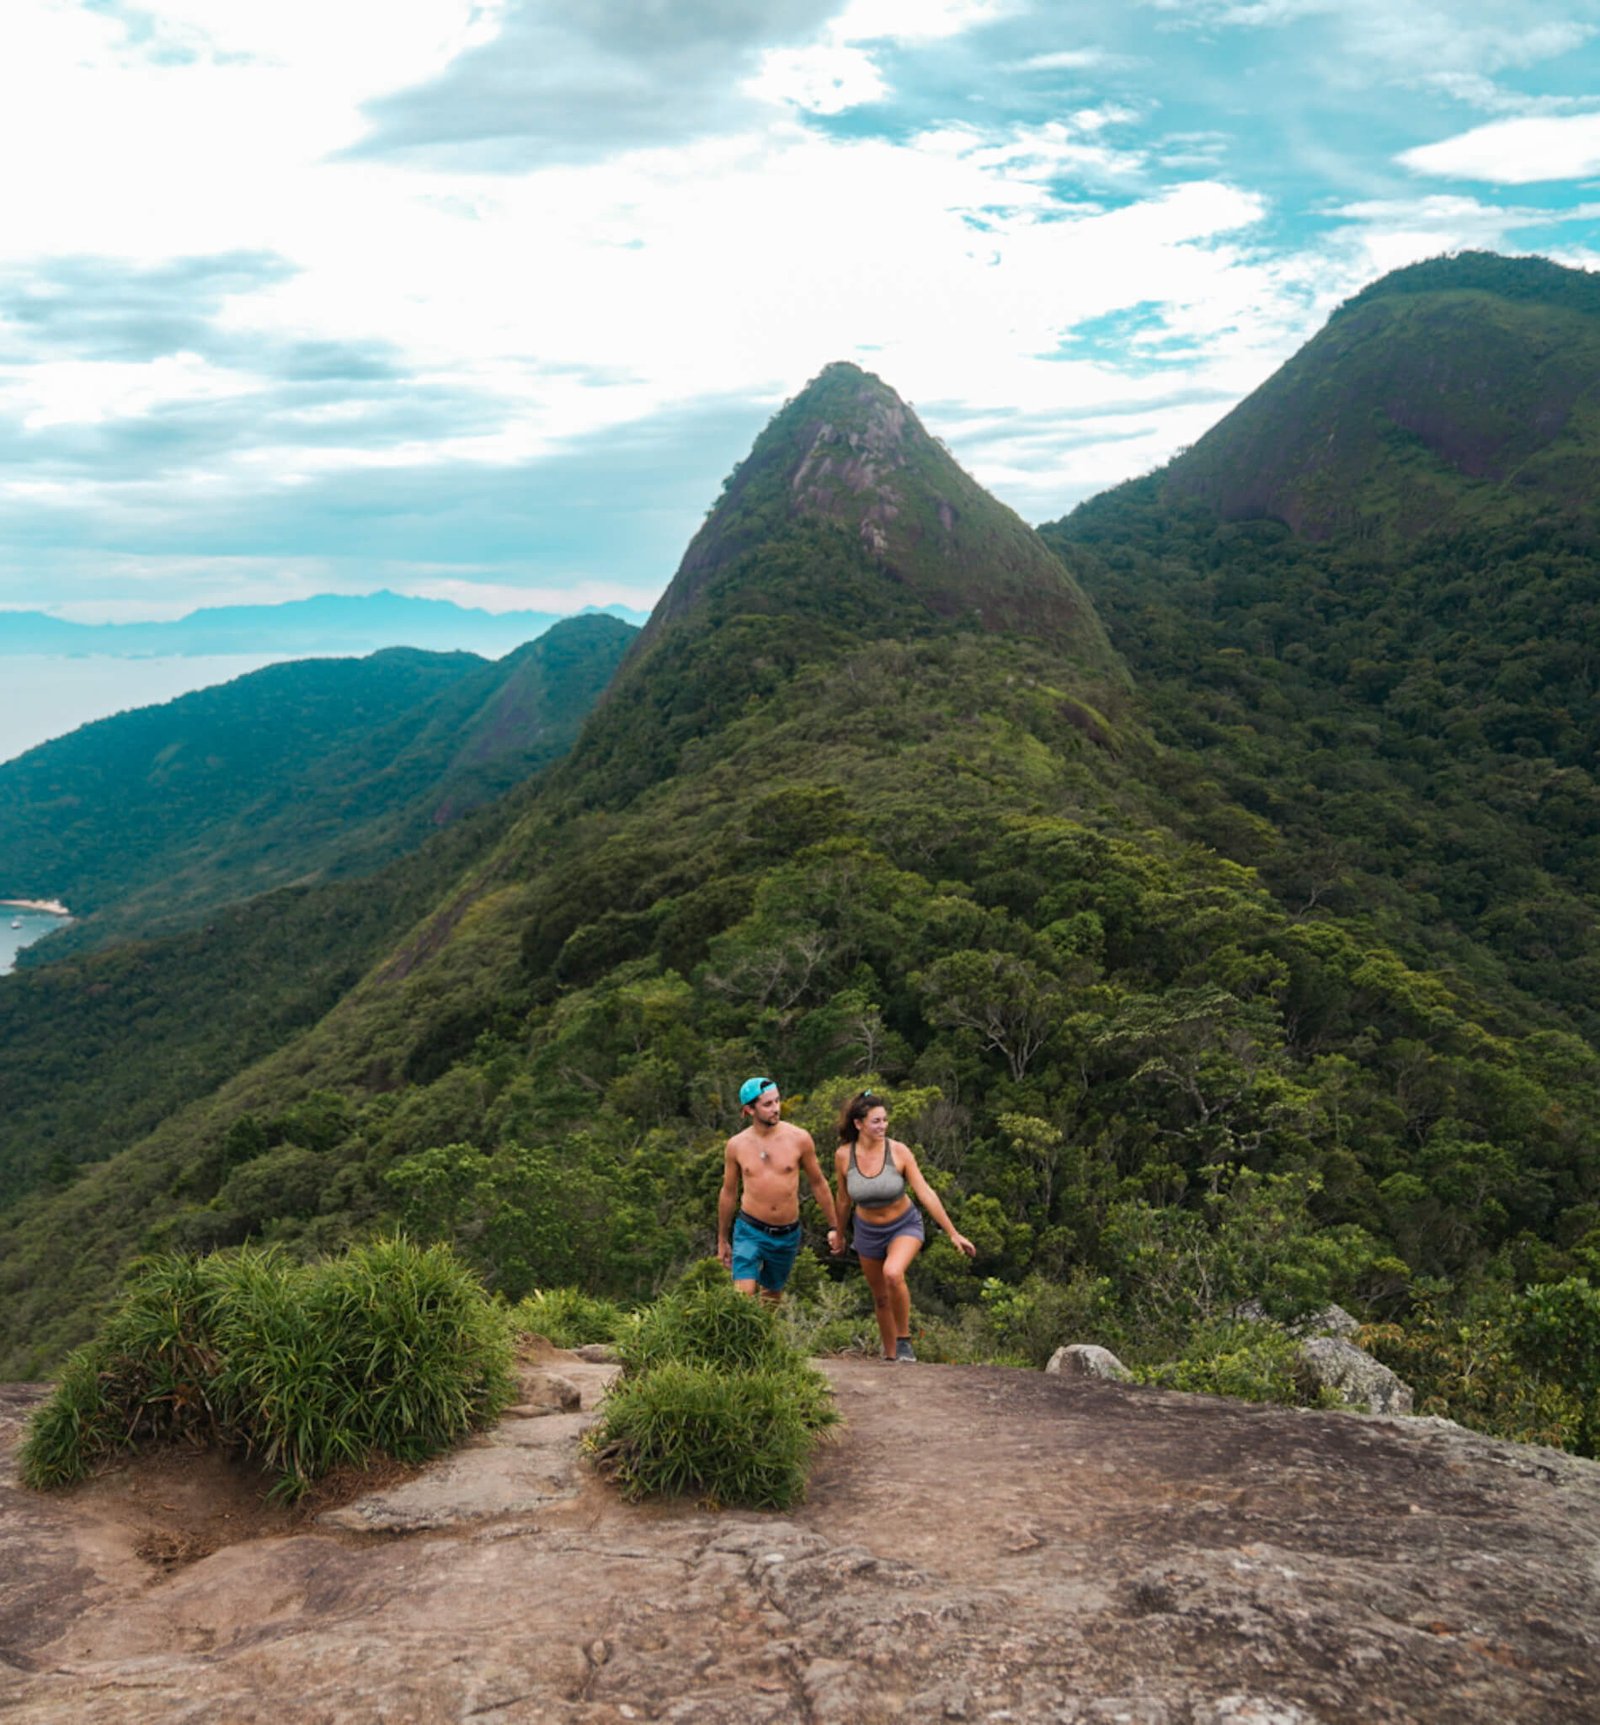 Mamangua Sugarloaf peak, things to do in Paraty, Brazil